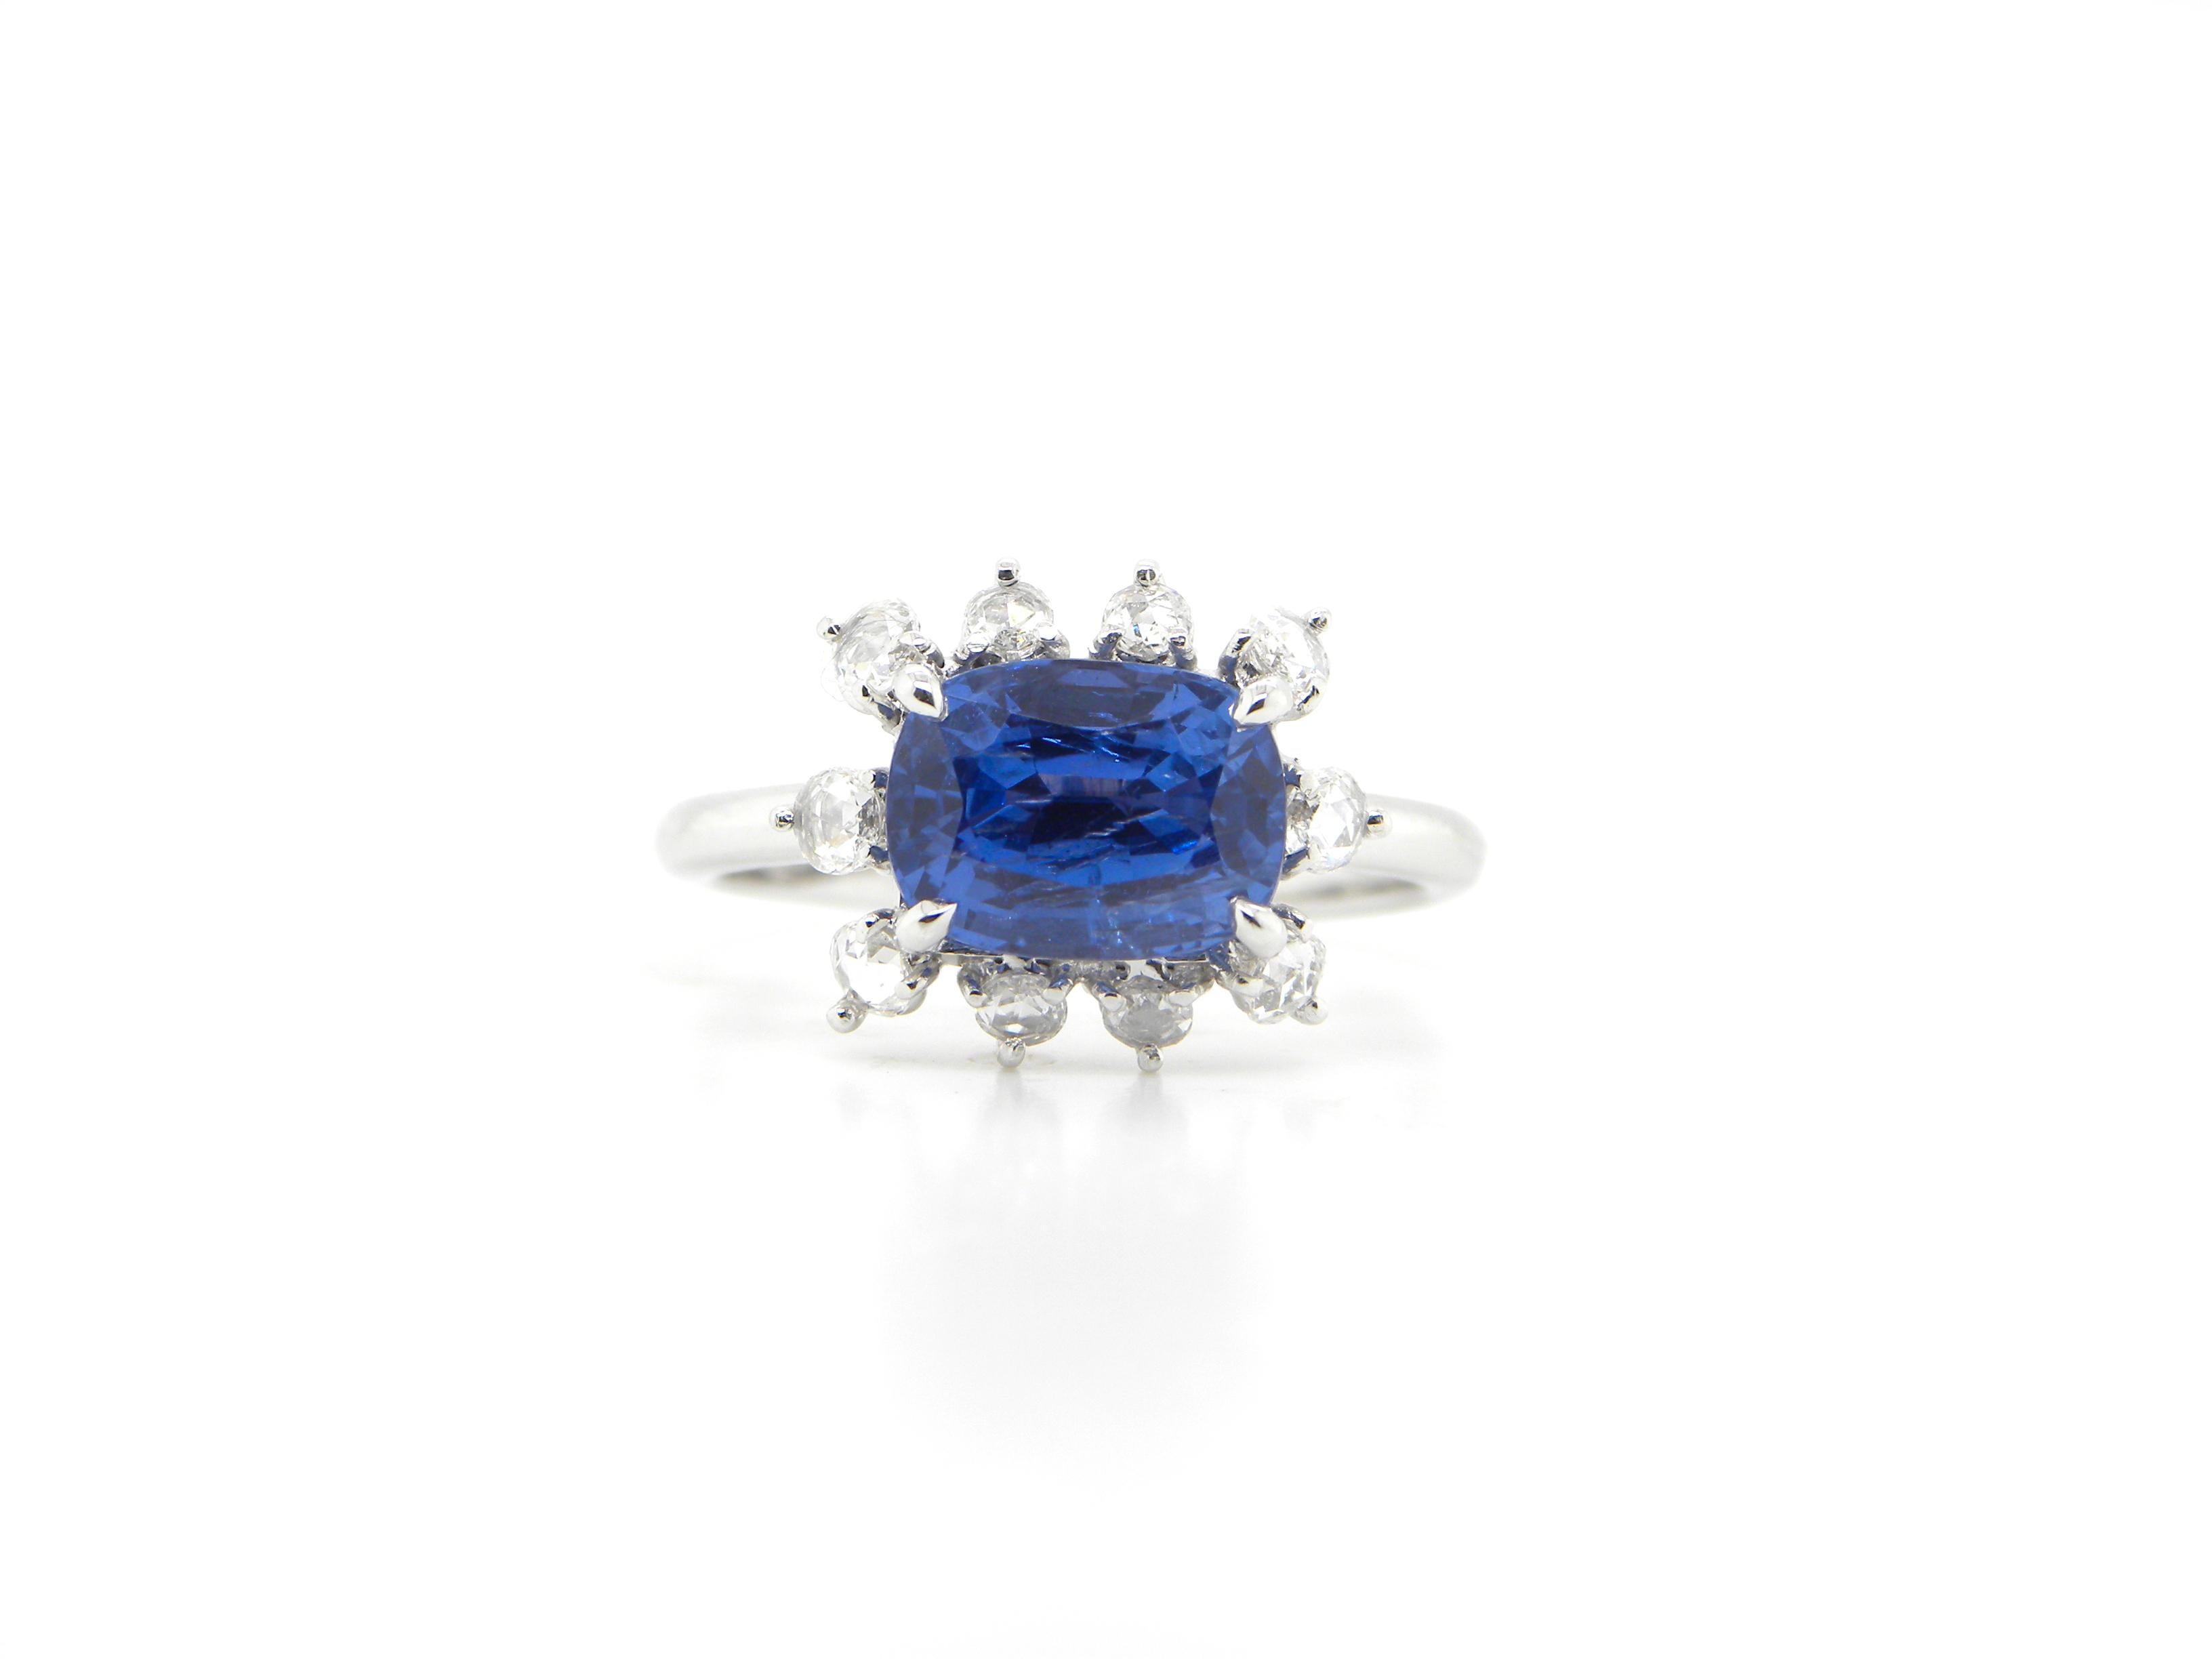 2.67 Carat GIA Certified Unheated Burmese Sapphire and Diamond Engagement Ring:

An elegant ring, it features a gorgeous GIA certified cushion-cut unheated Burmese blue sapphire weighing 2.67 carat, surrounded by a halo of super-white rose cut